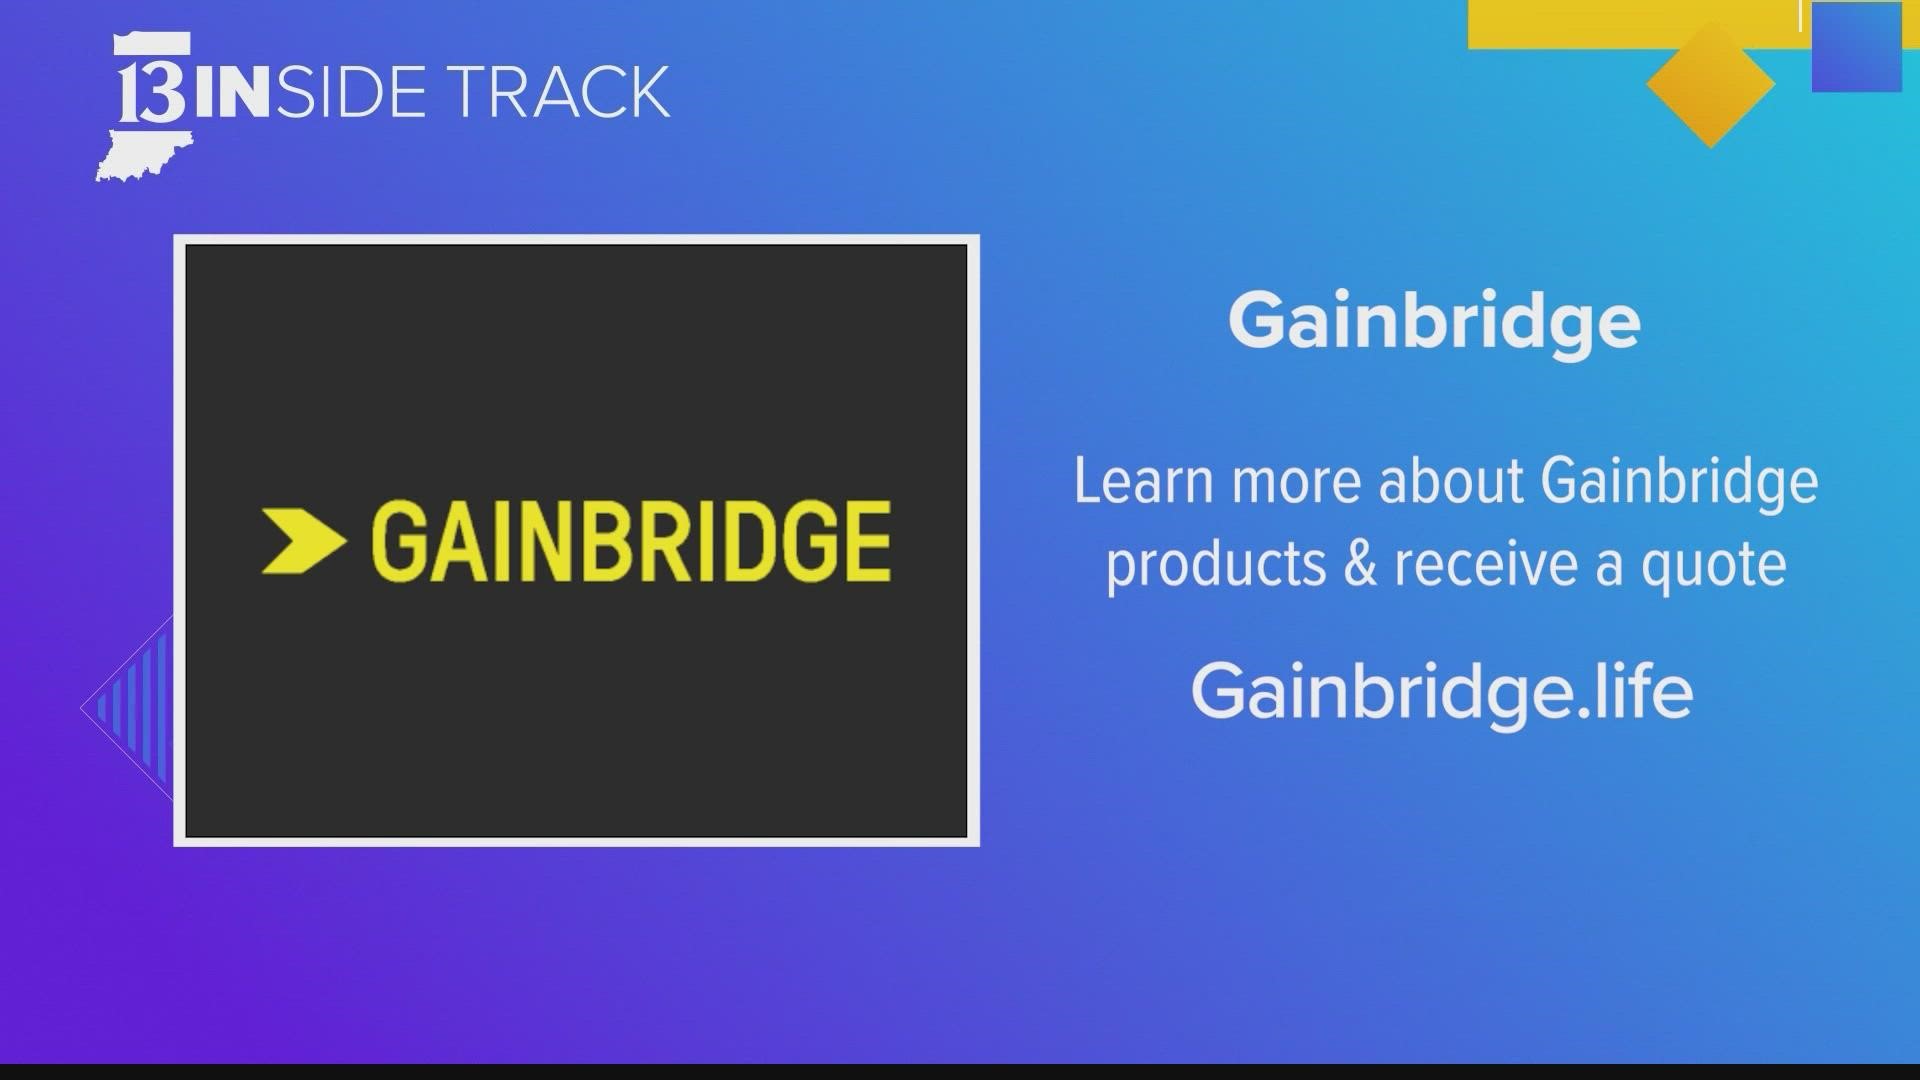 Gainbridge is the new name sponsor for the Fieldhouse. The company offers financial products like annuities through their digital platform.